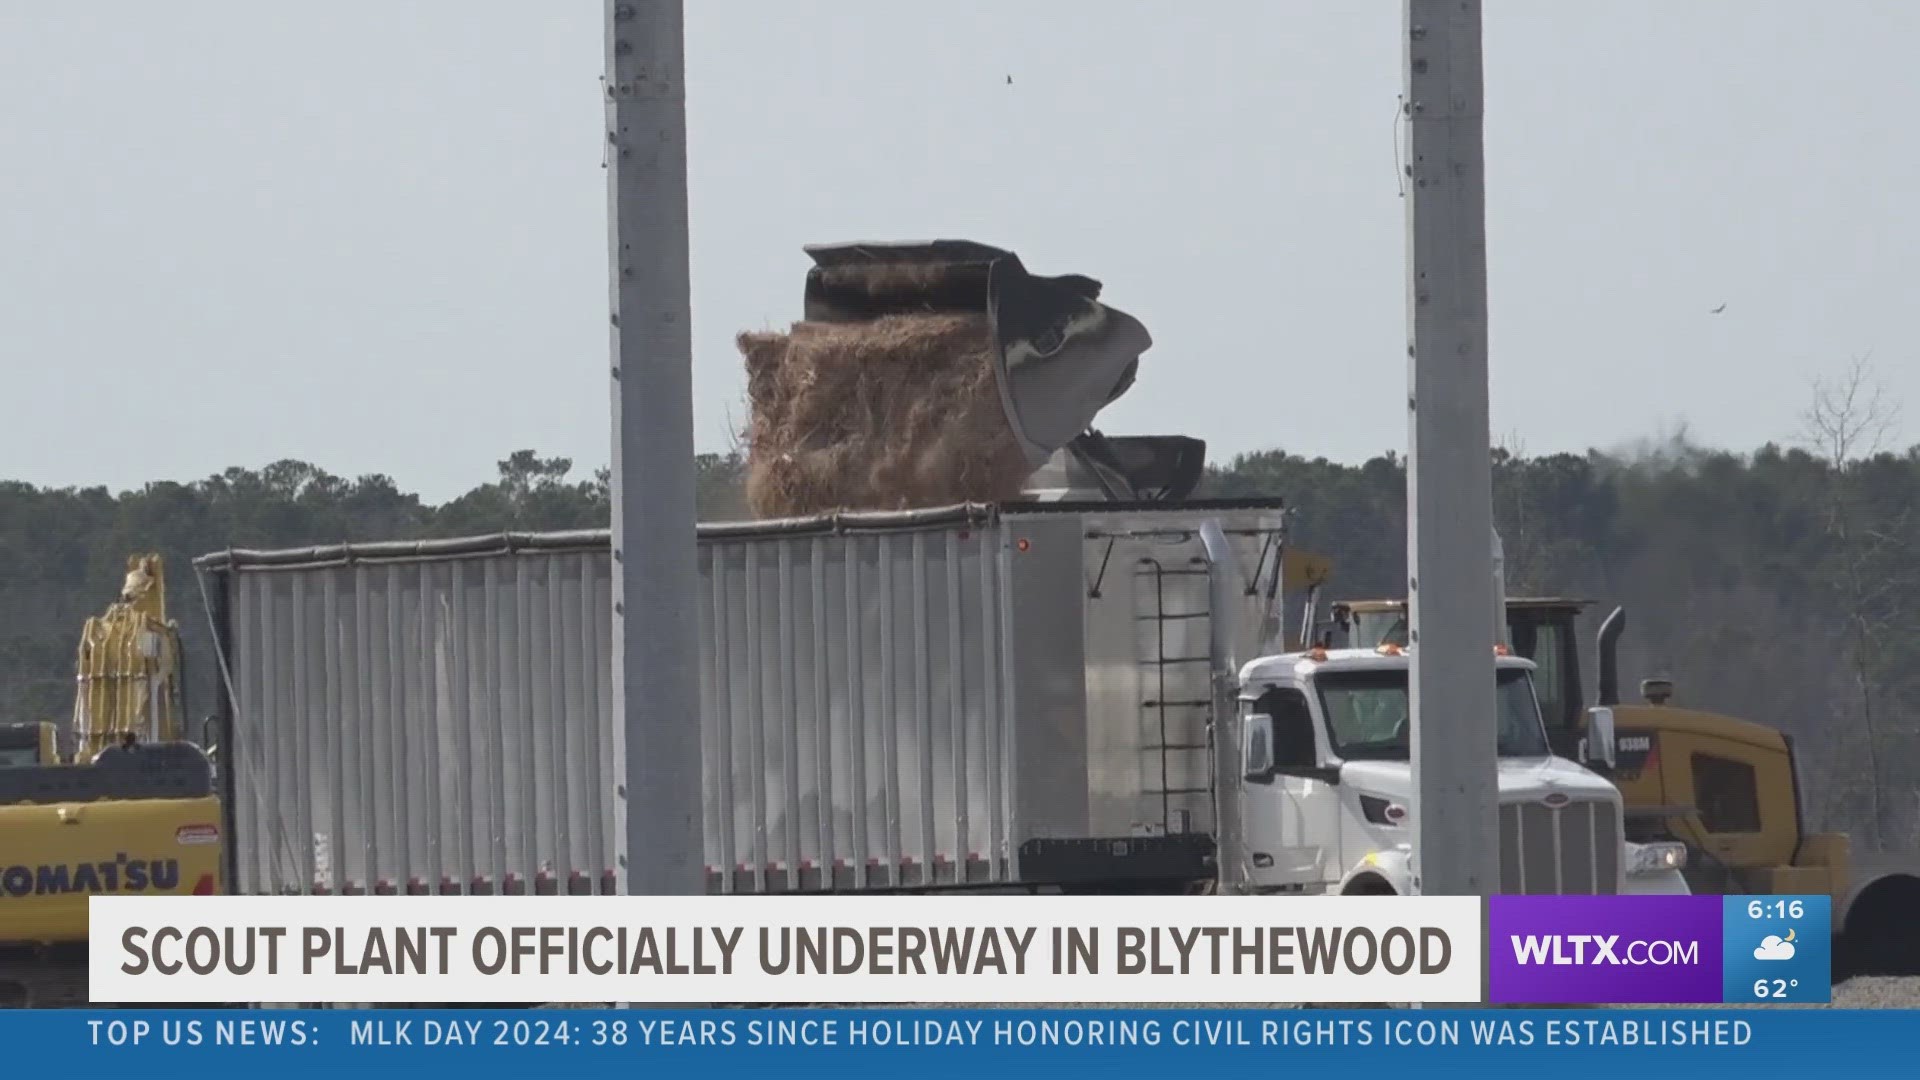 After months of uncertainty and pausing construction, the electric vehicle plant that will span over 1,600 acres in Blythewood is set to resume building.